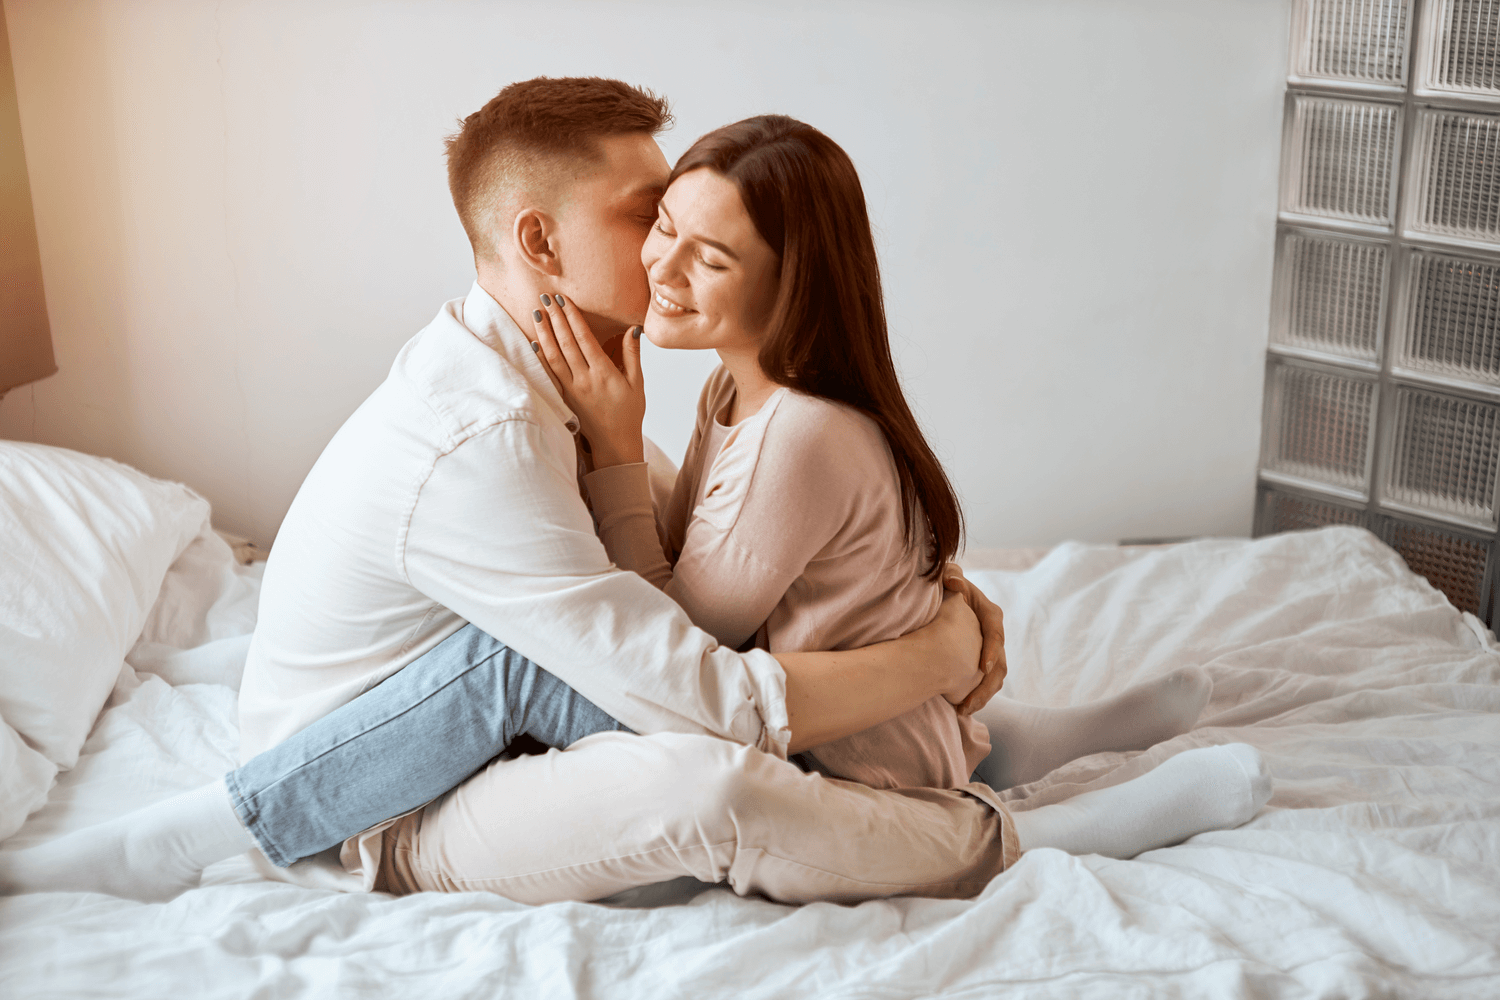 making love during second trimester of pregnancy